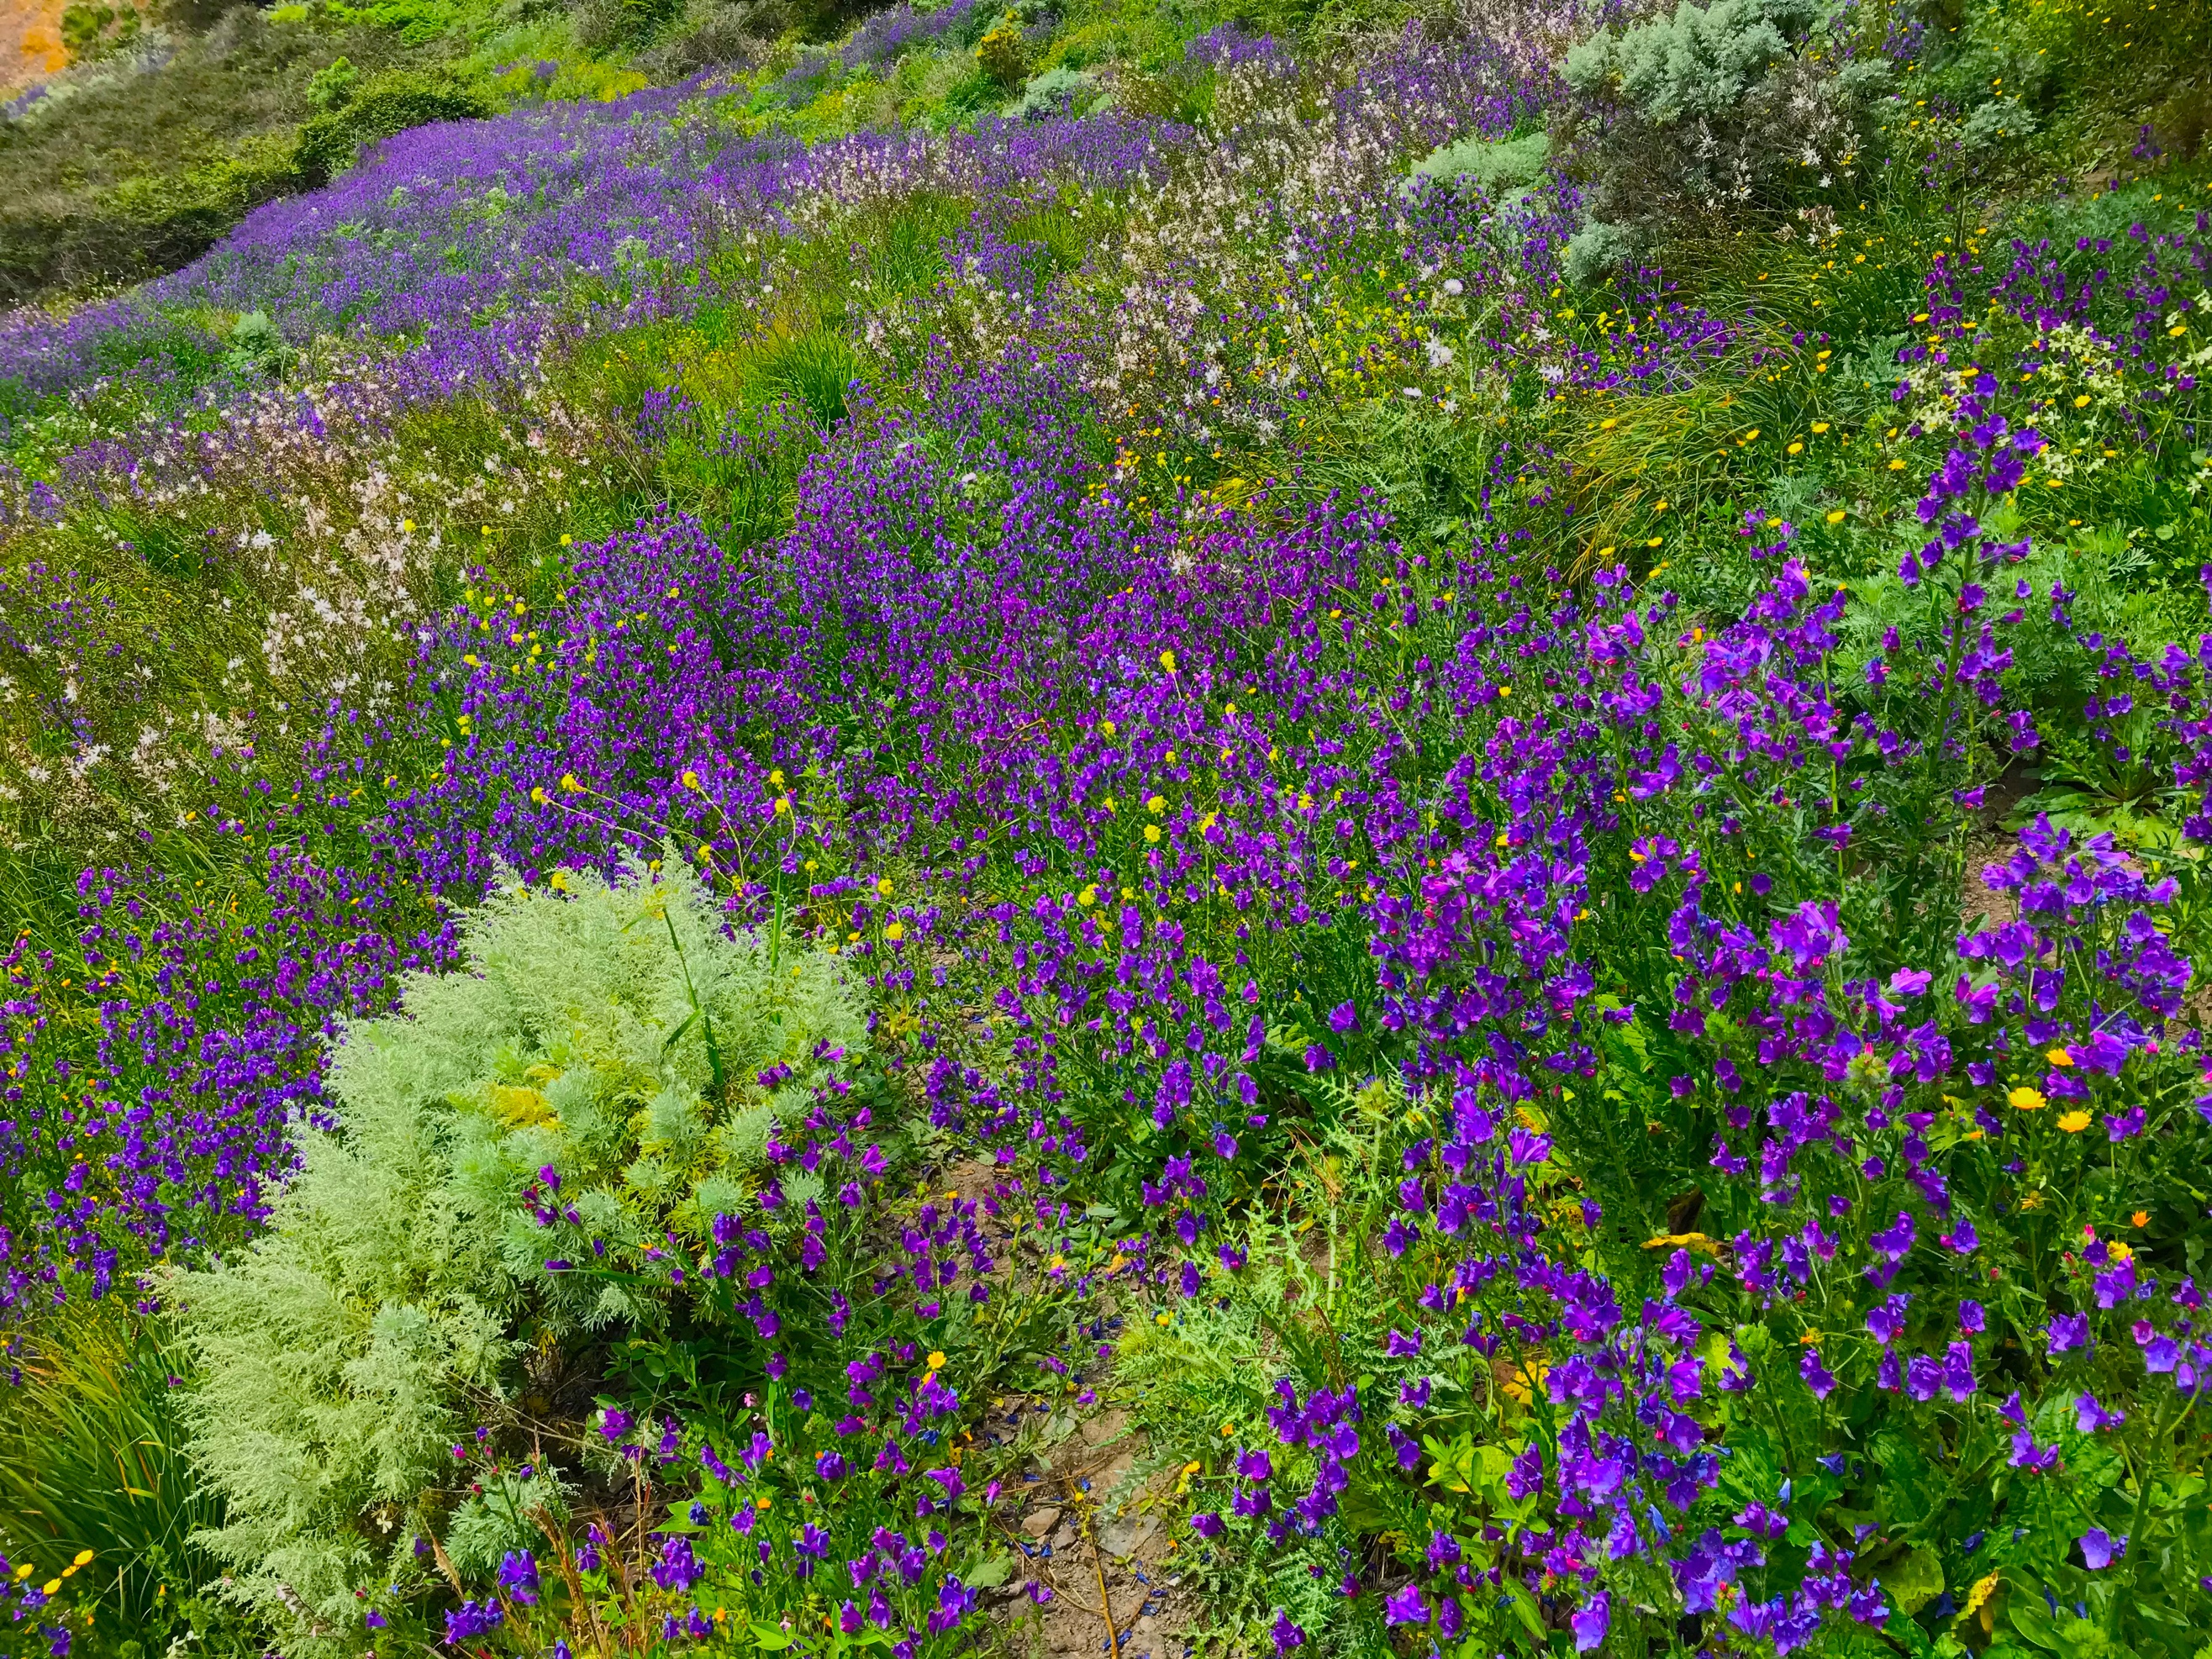 A field of purple flowers

Description automatically generated with low confidence